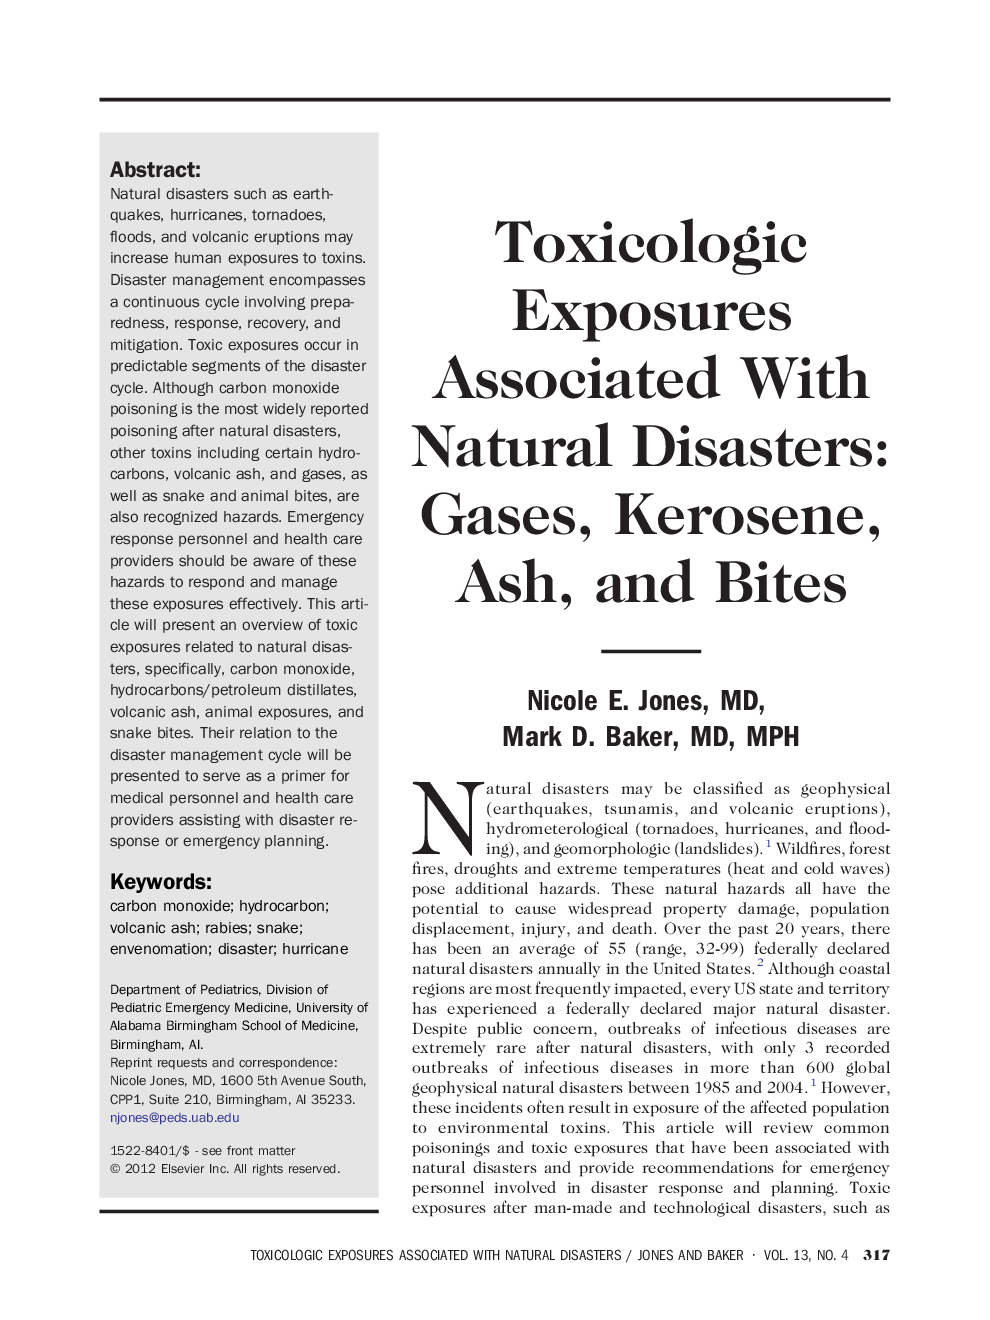 Toxicologic Exposures Associated With Natural Disasters: Gases, Kerosene, Ash, and Bites